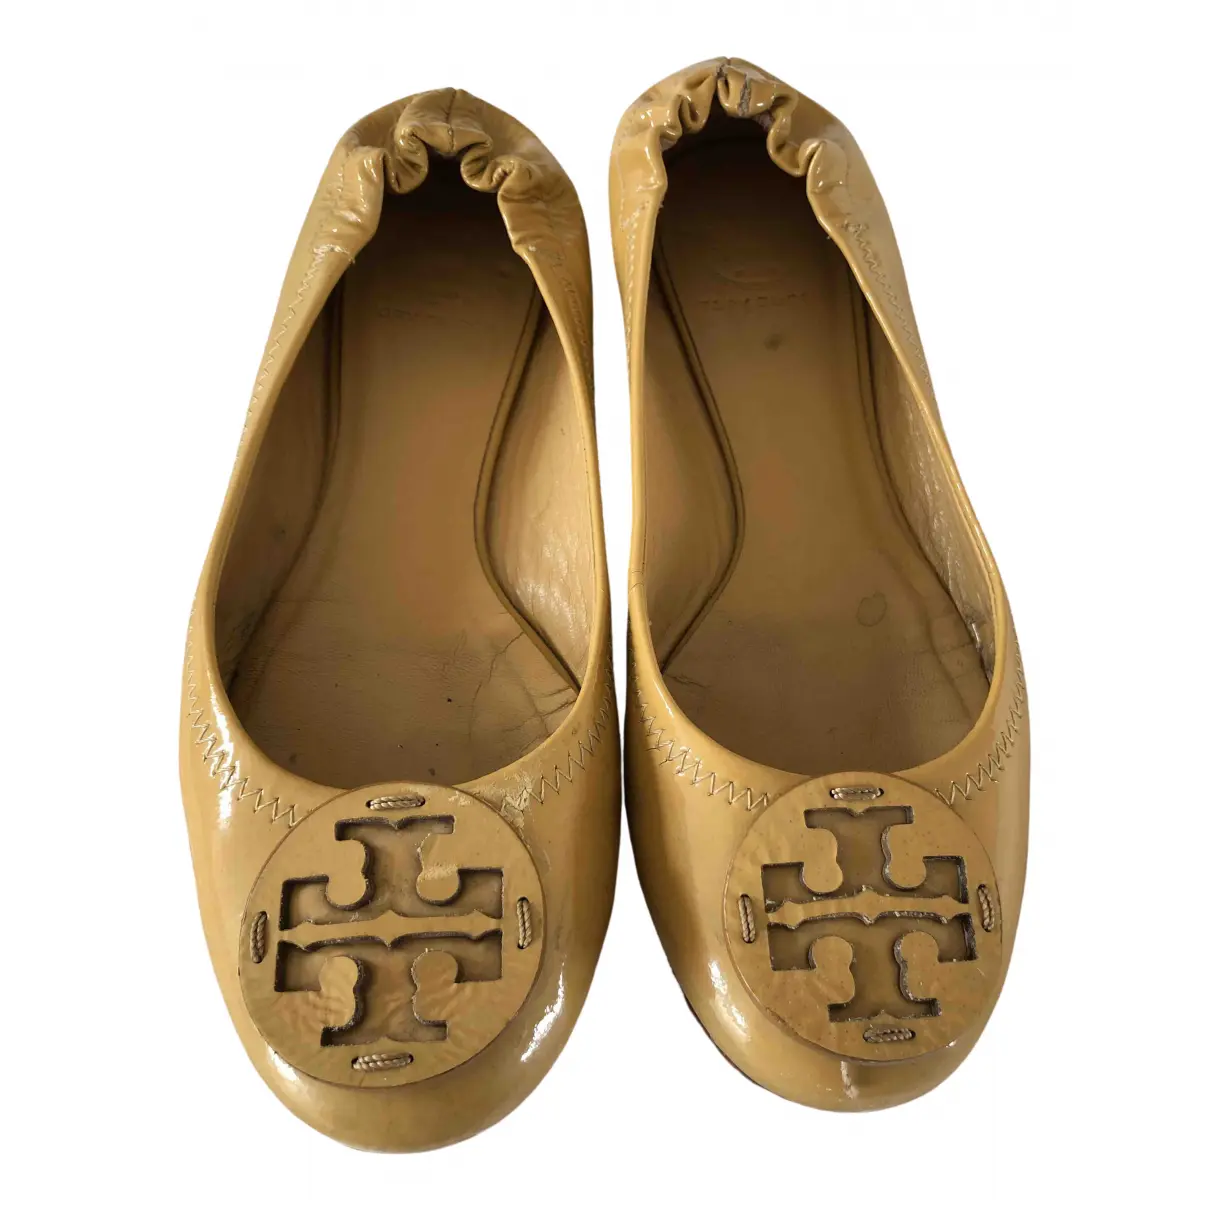 Patent leather ballet flats Tory Burch